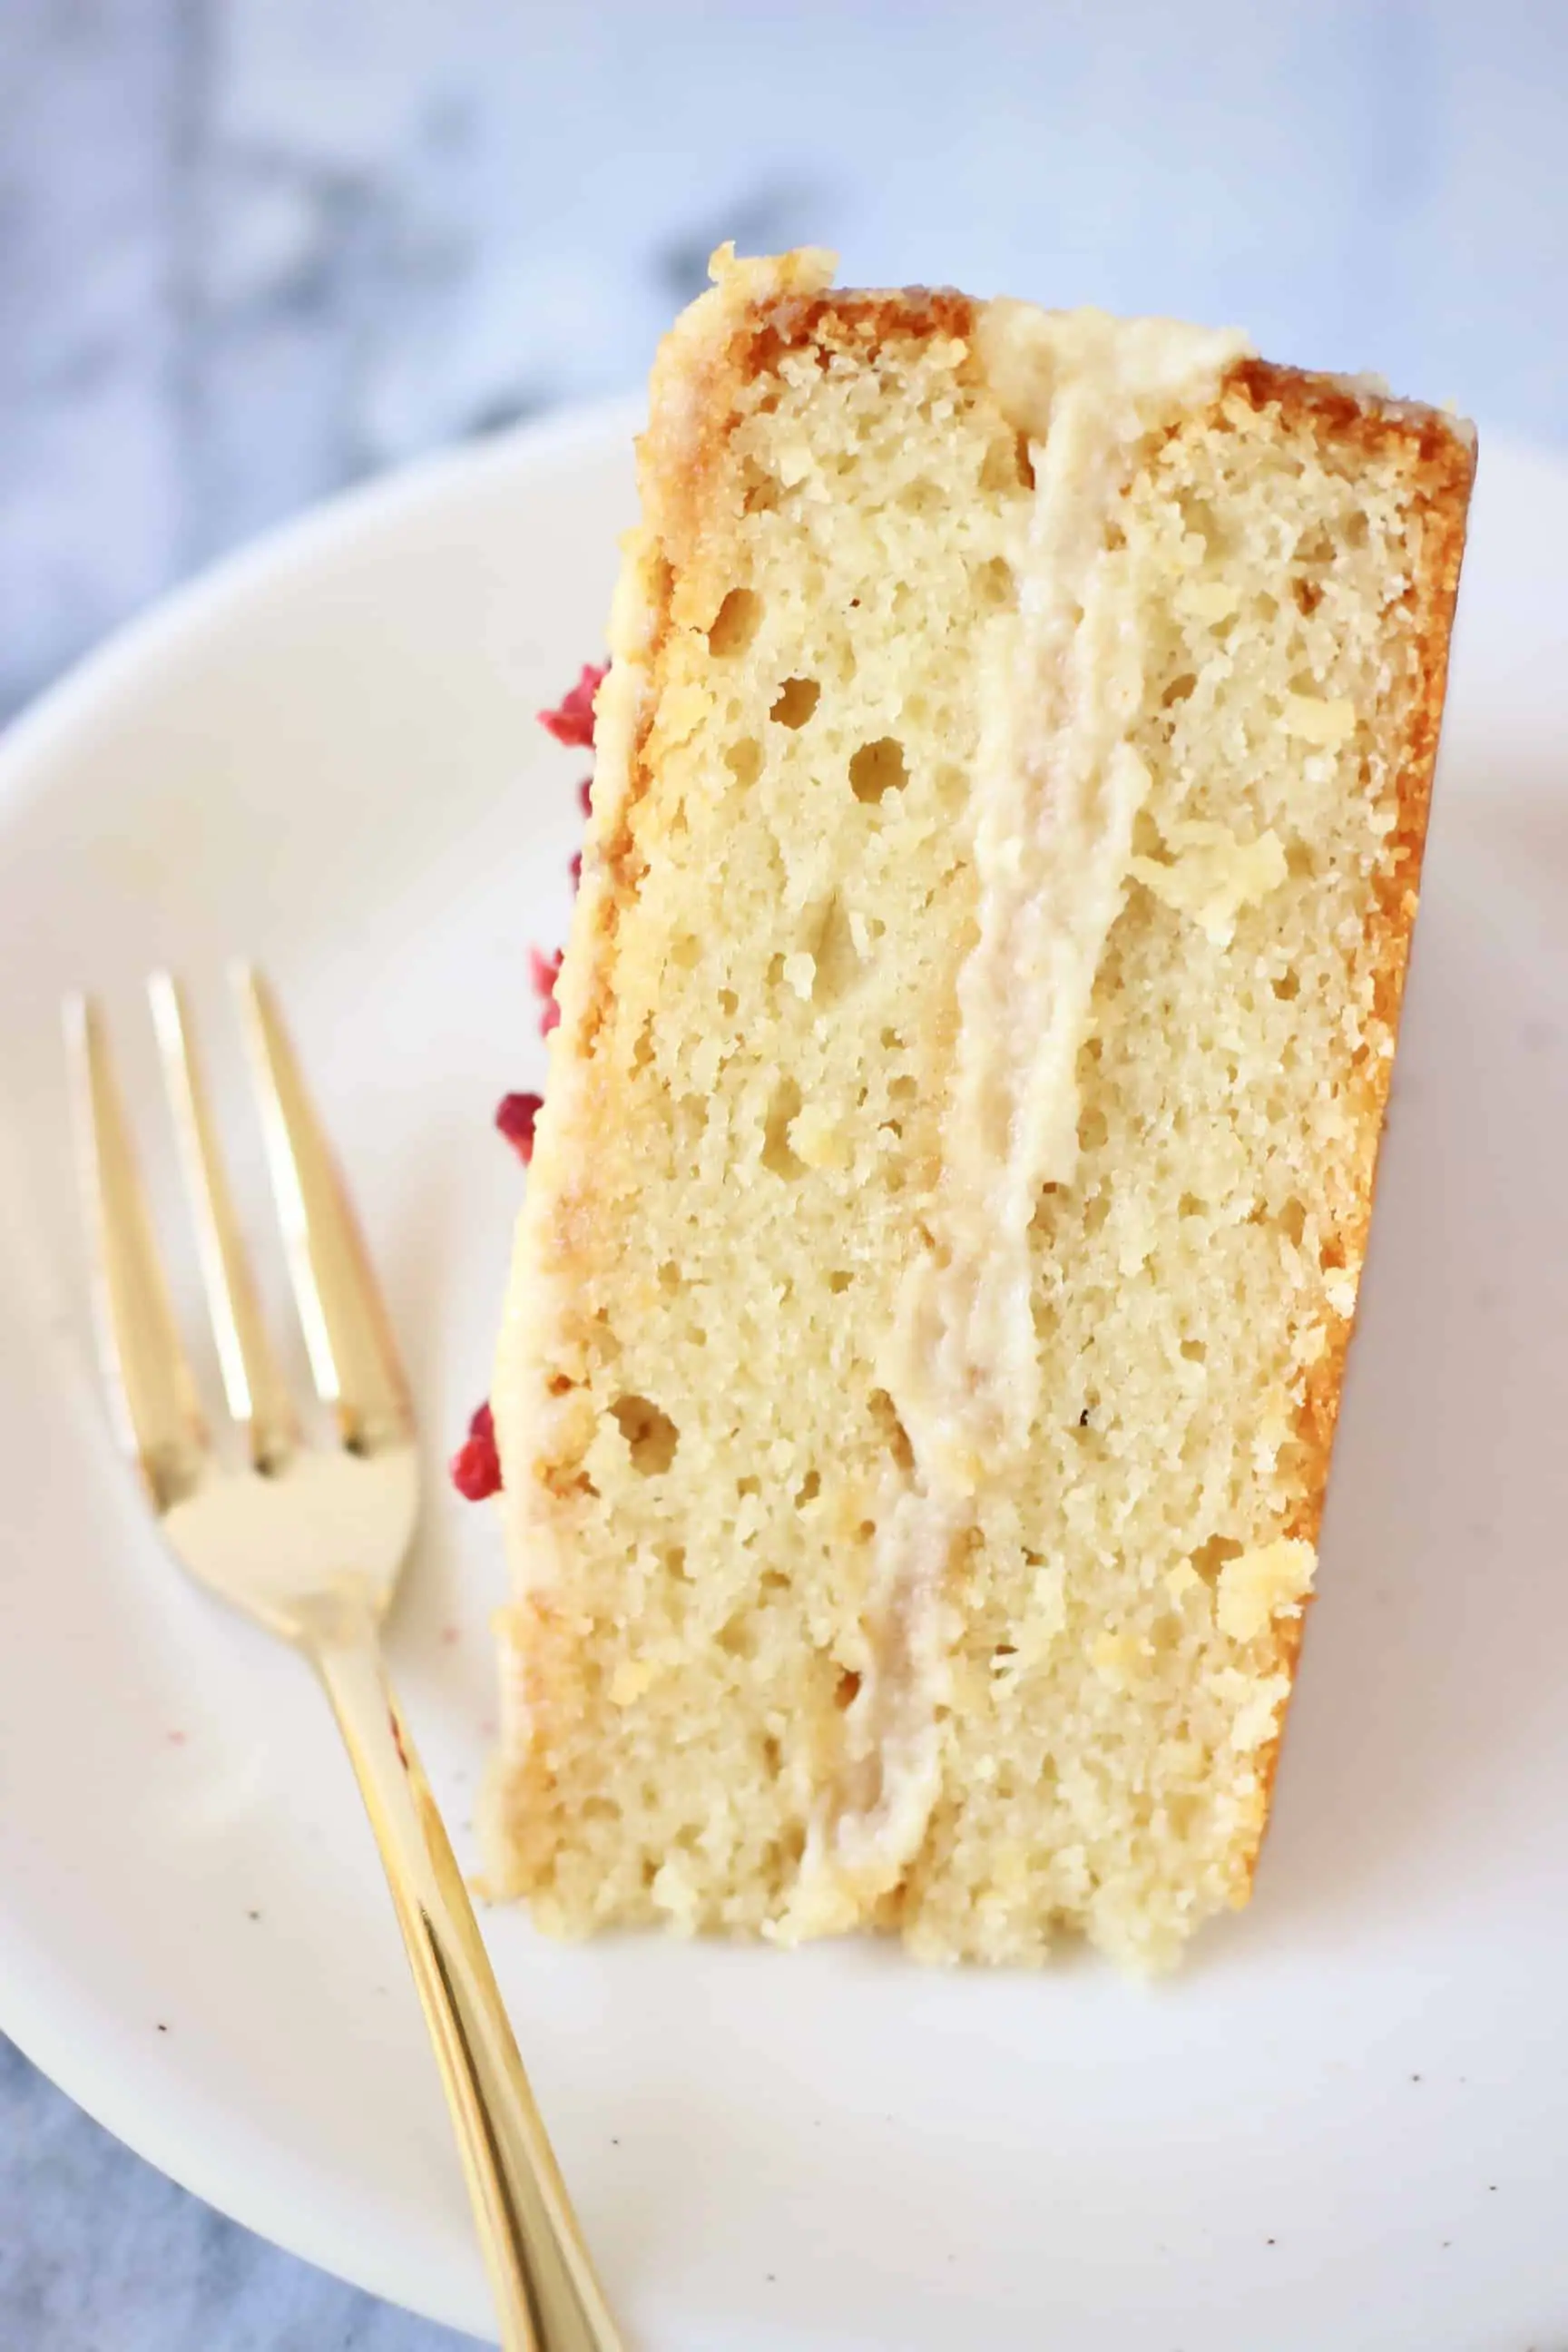 A slice of gluten-free vegan vanilla  cake with white frosting on a plate with a gold fork